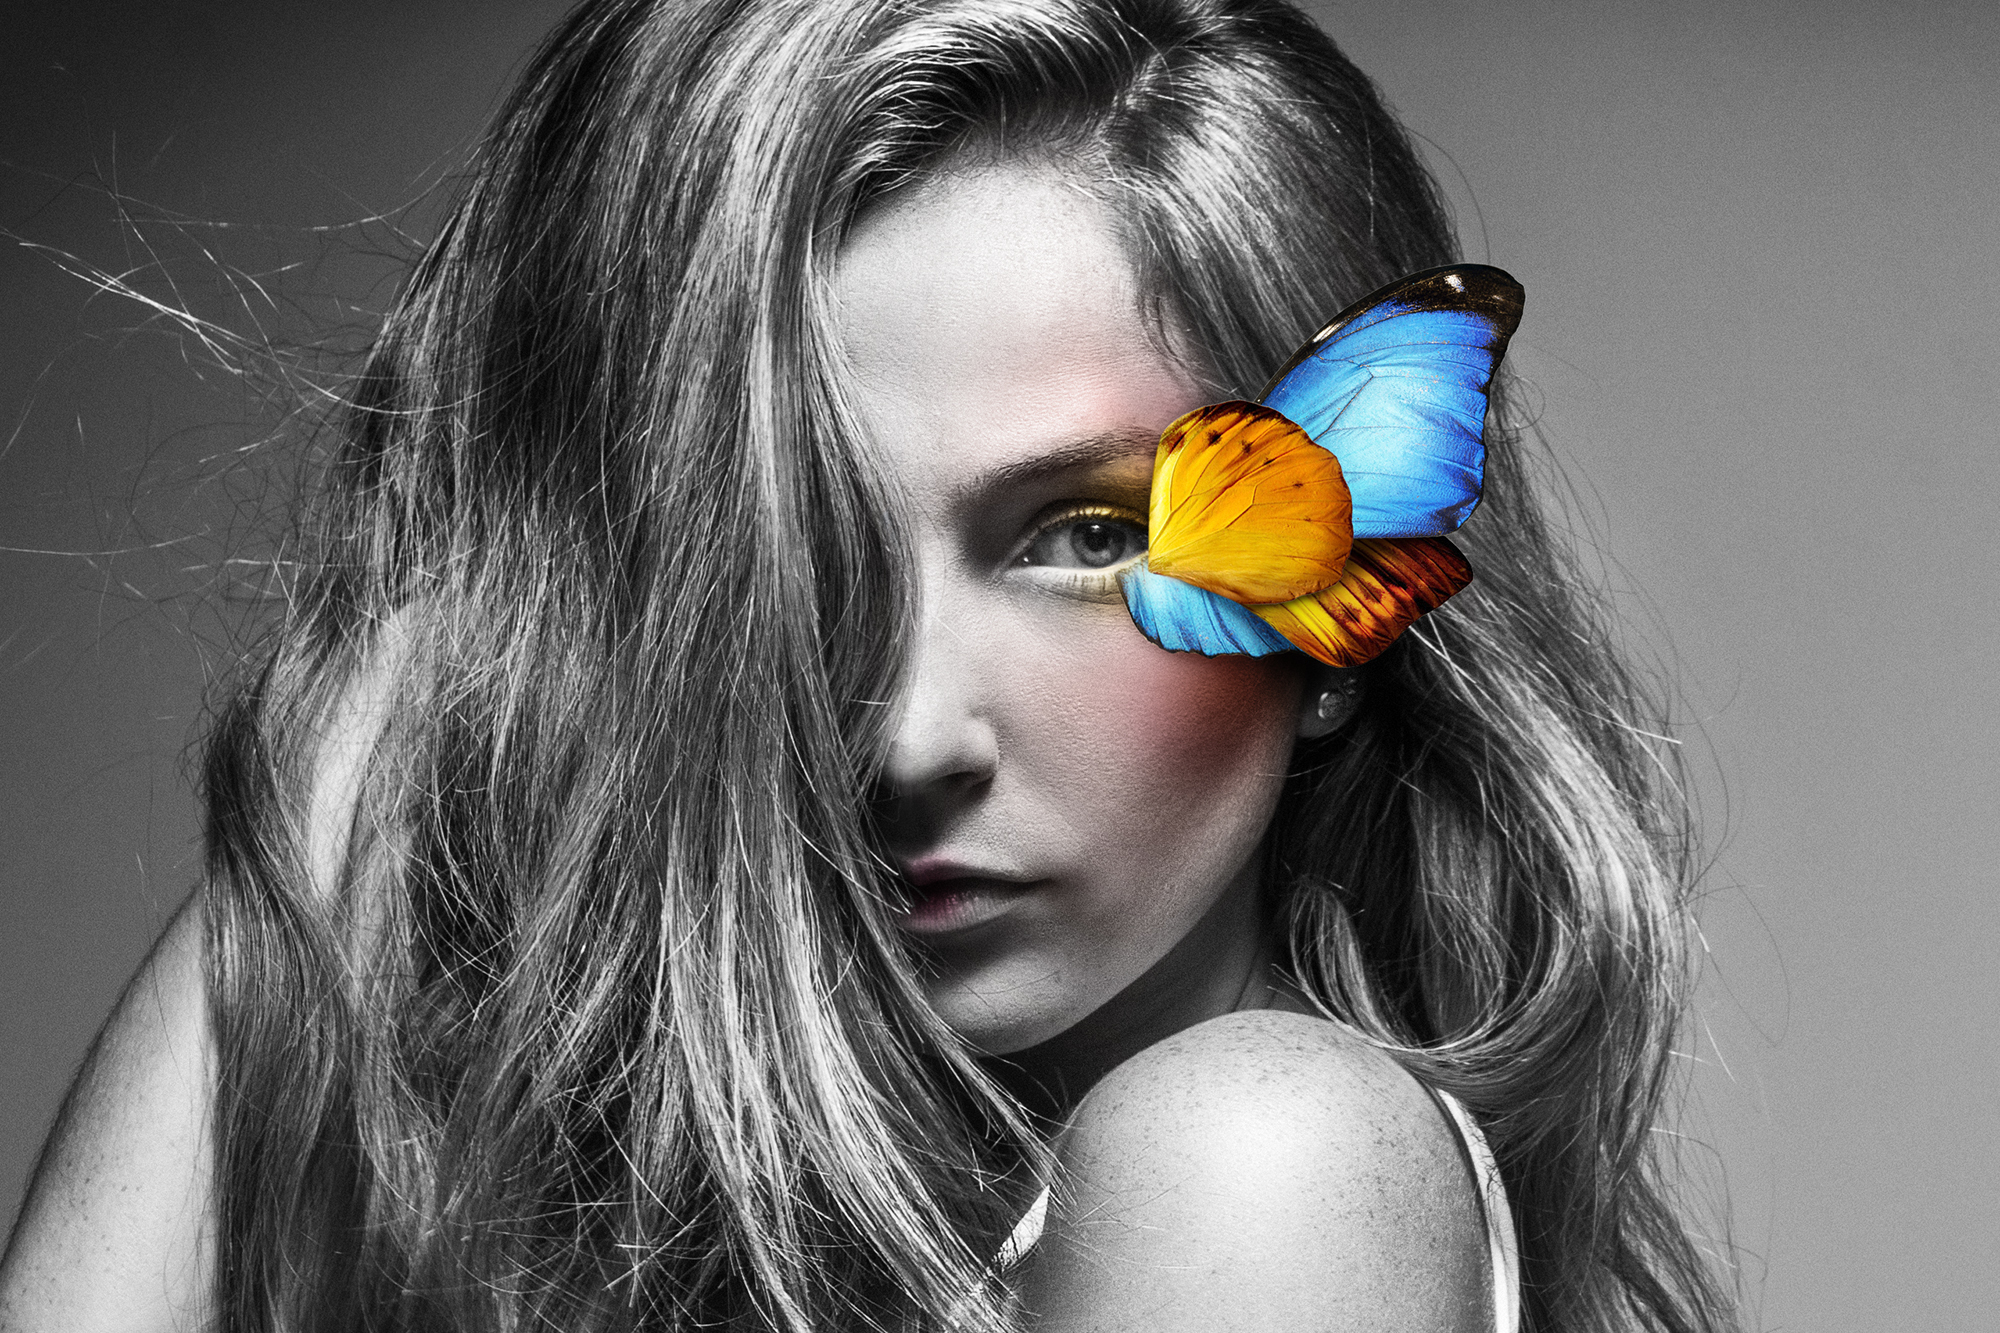  Hailie with Butterfly Wings, 2016 